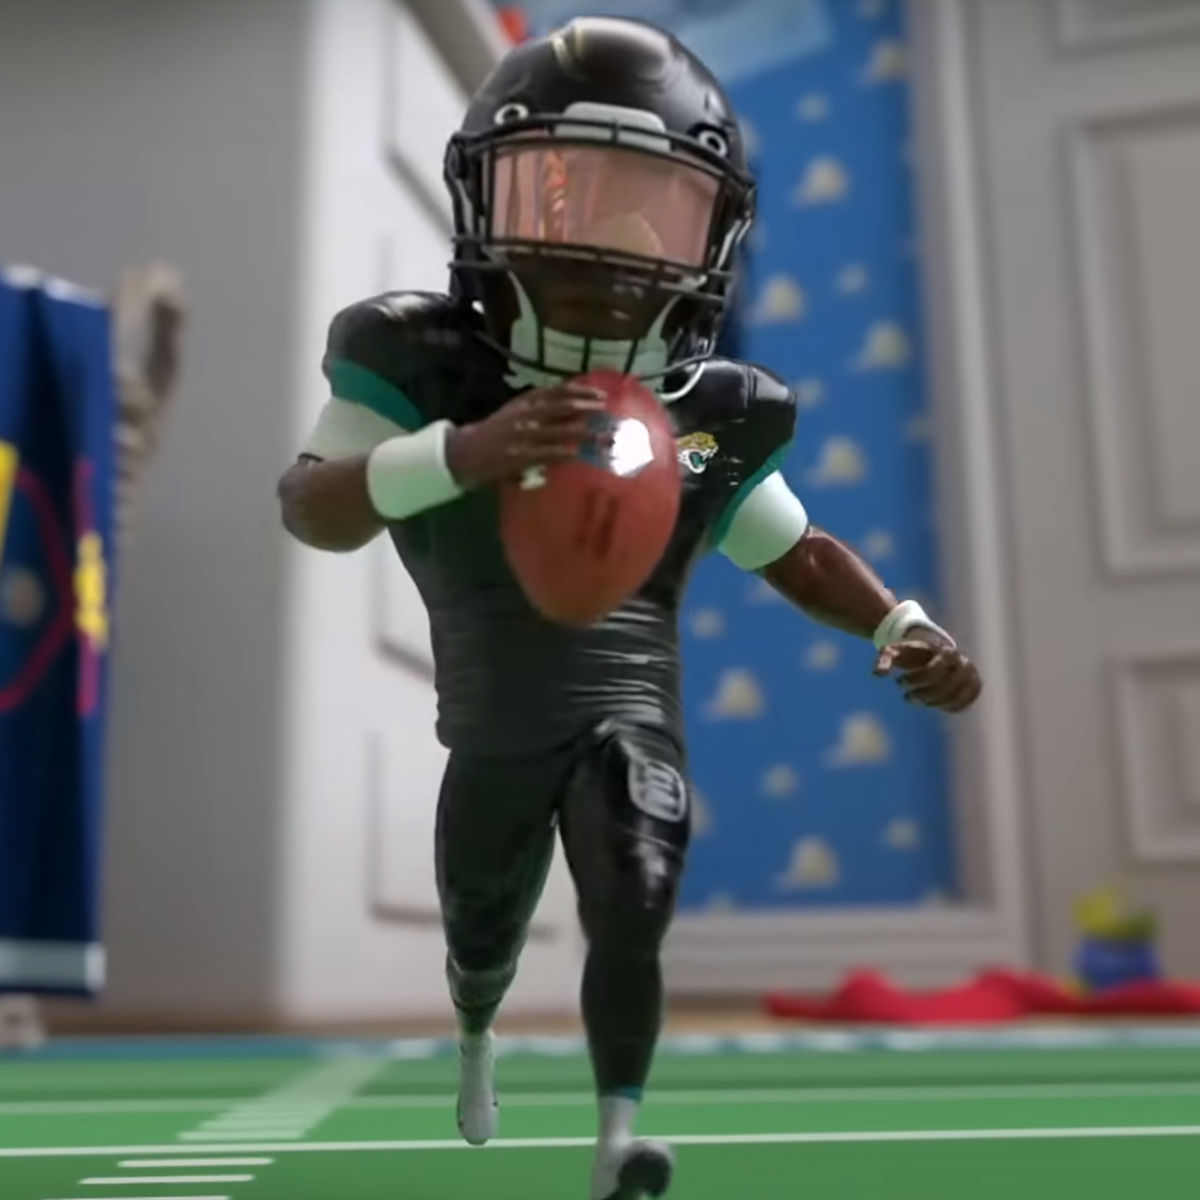 Disney is animating an NFL game in Toy Story style - but who is it for?